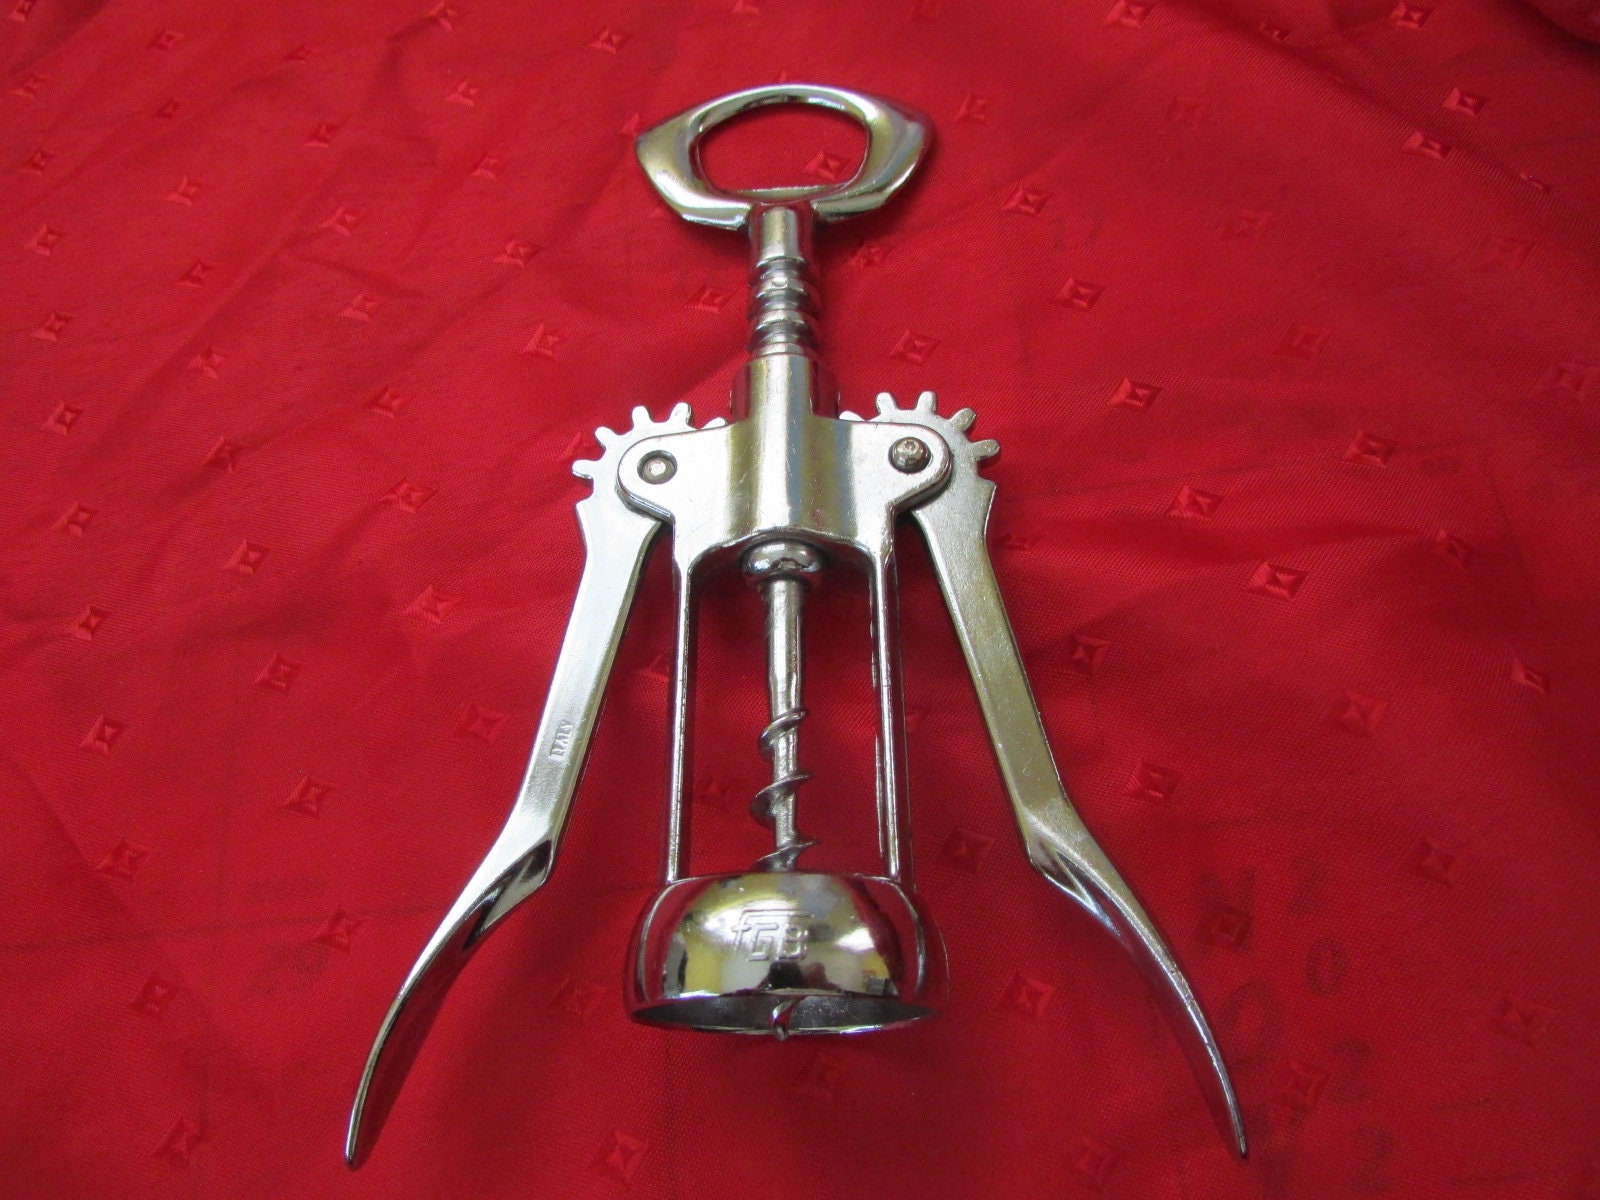 Vintage Swing Away Manual Can Opener With Green Grip Handle - Made In USA  on eBid United States